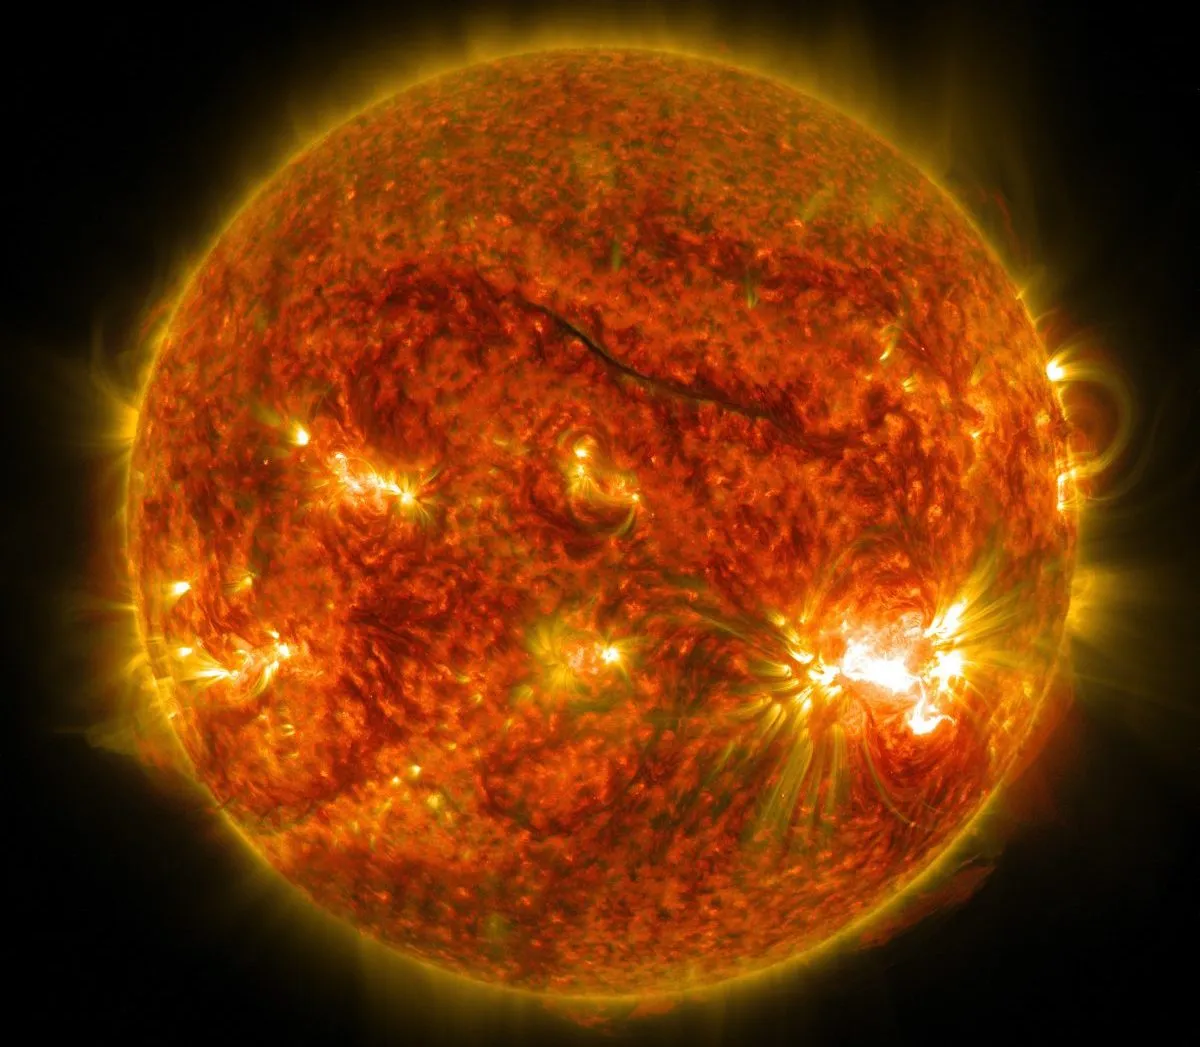 An image of the Sun showing solar flares erupting from its surface, the largest of which can be seen on the lower right. The image was captured by NASA's Solar Dynamics Observatory on 26 October 2014. Credit: NASA/SDO